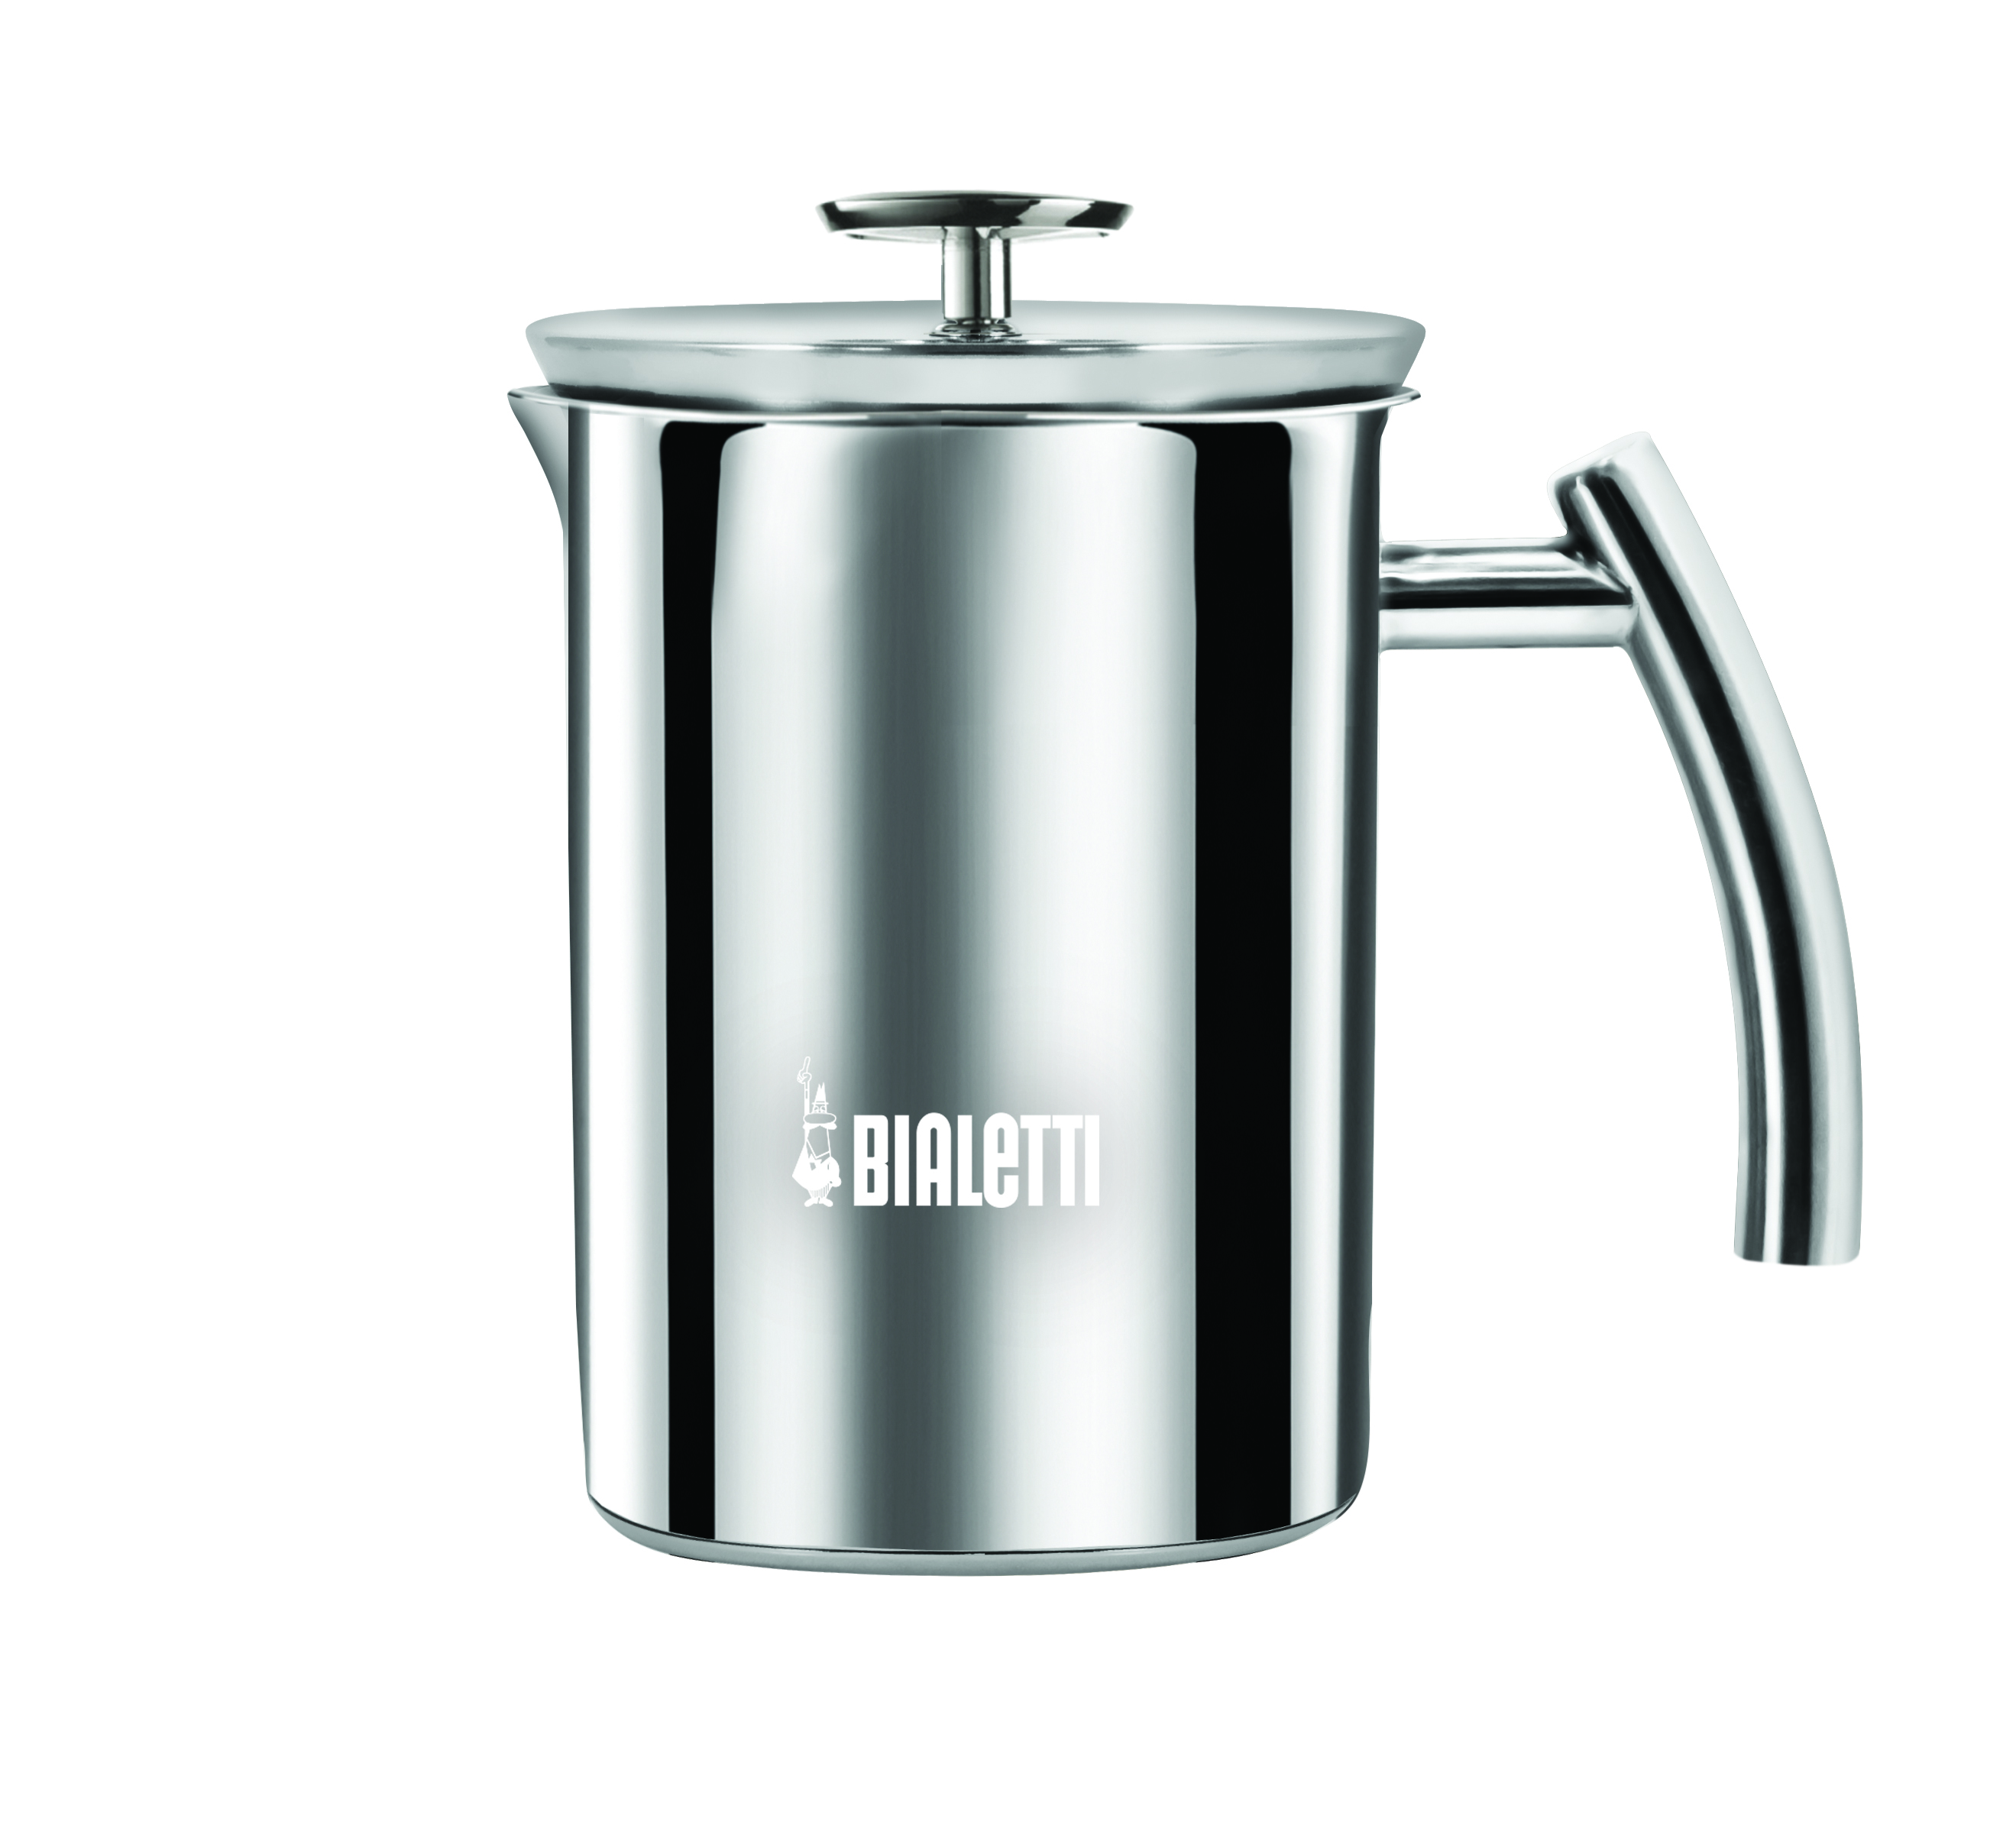 Bialetti - Tuttocrema Induction Milk Frother (3990)